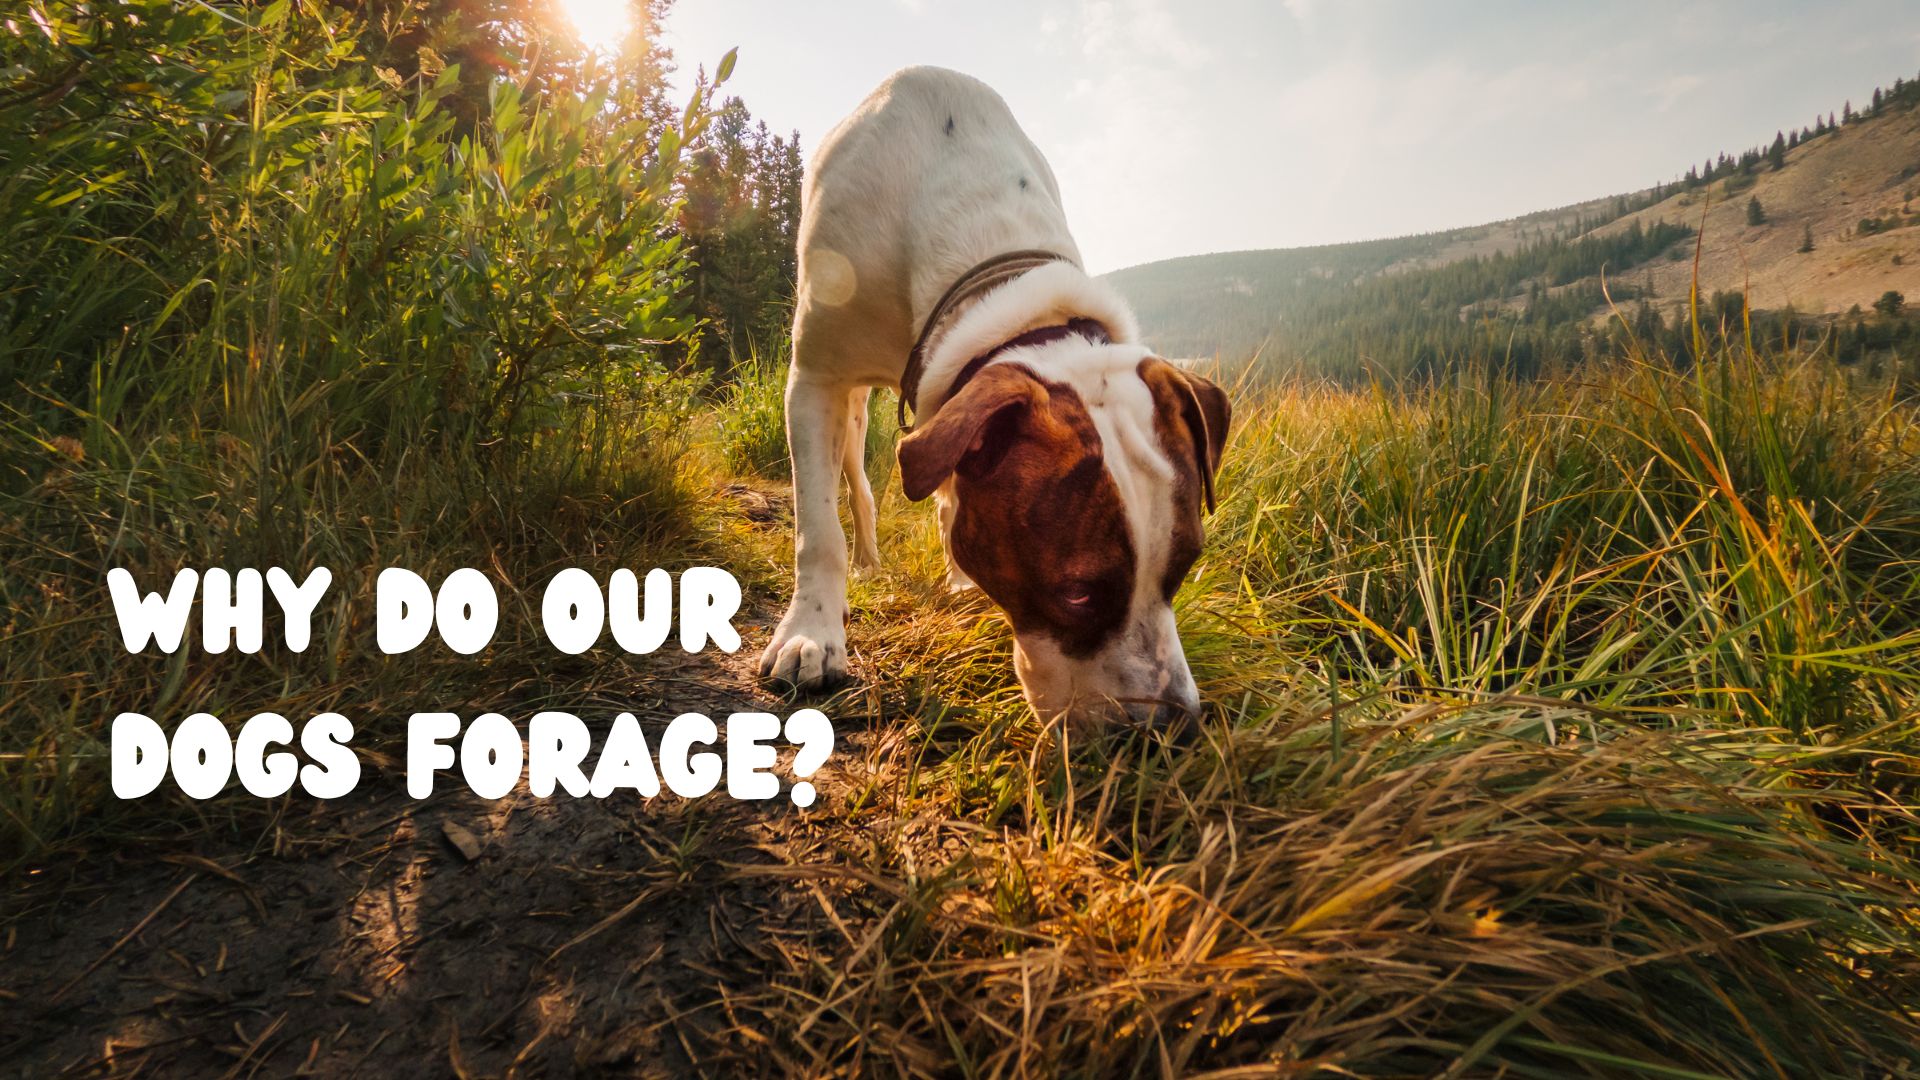 Why do our dogs forage?